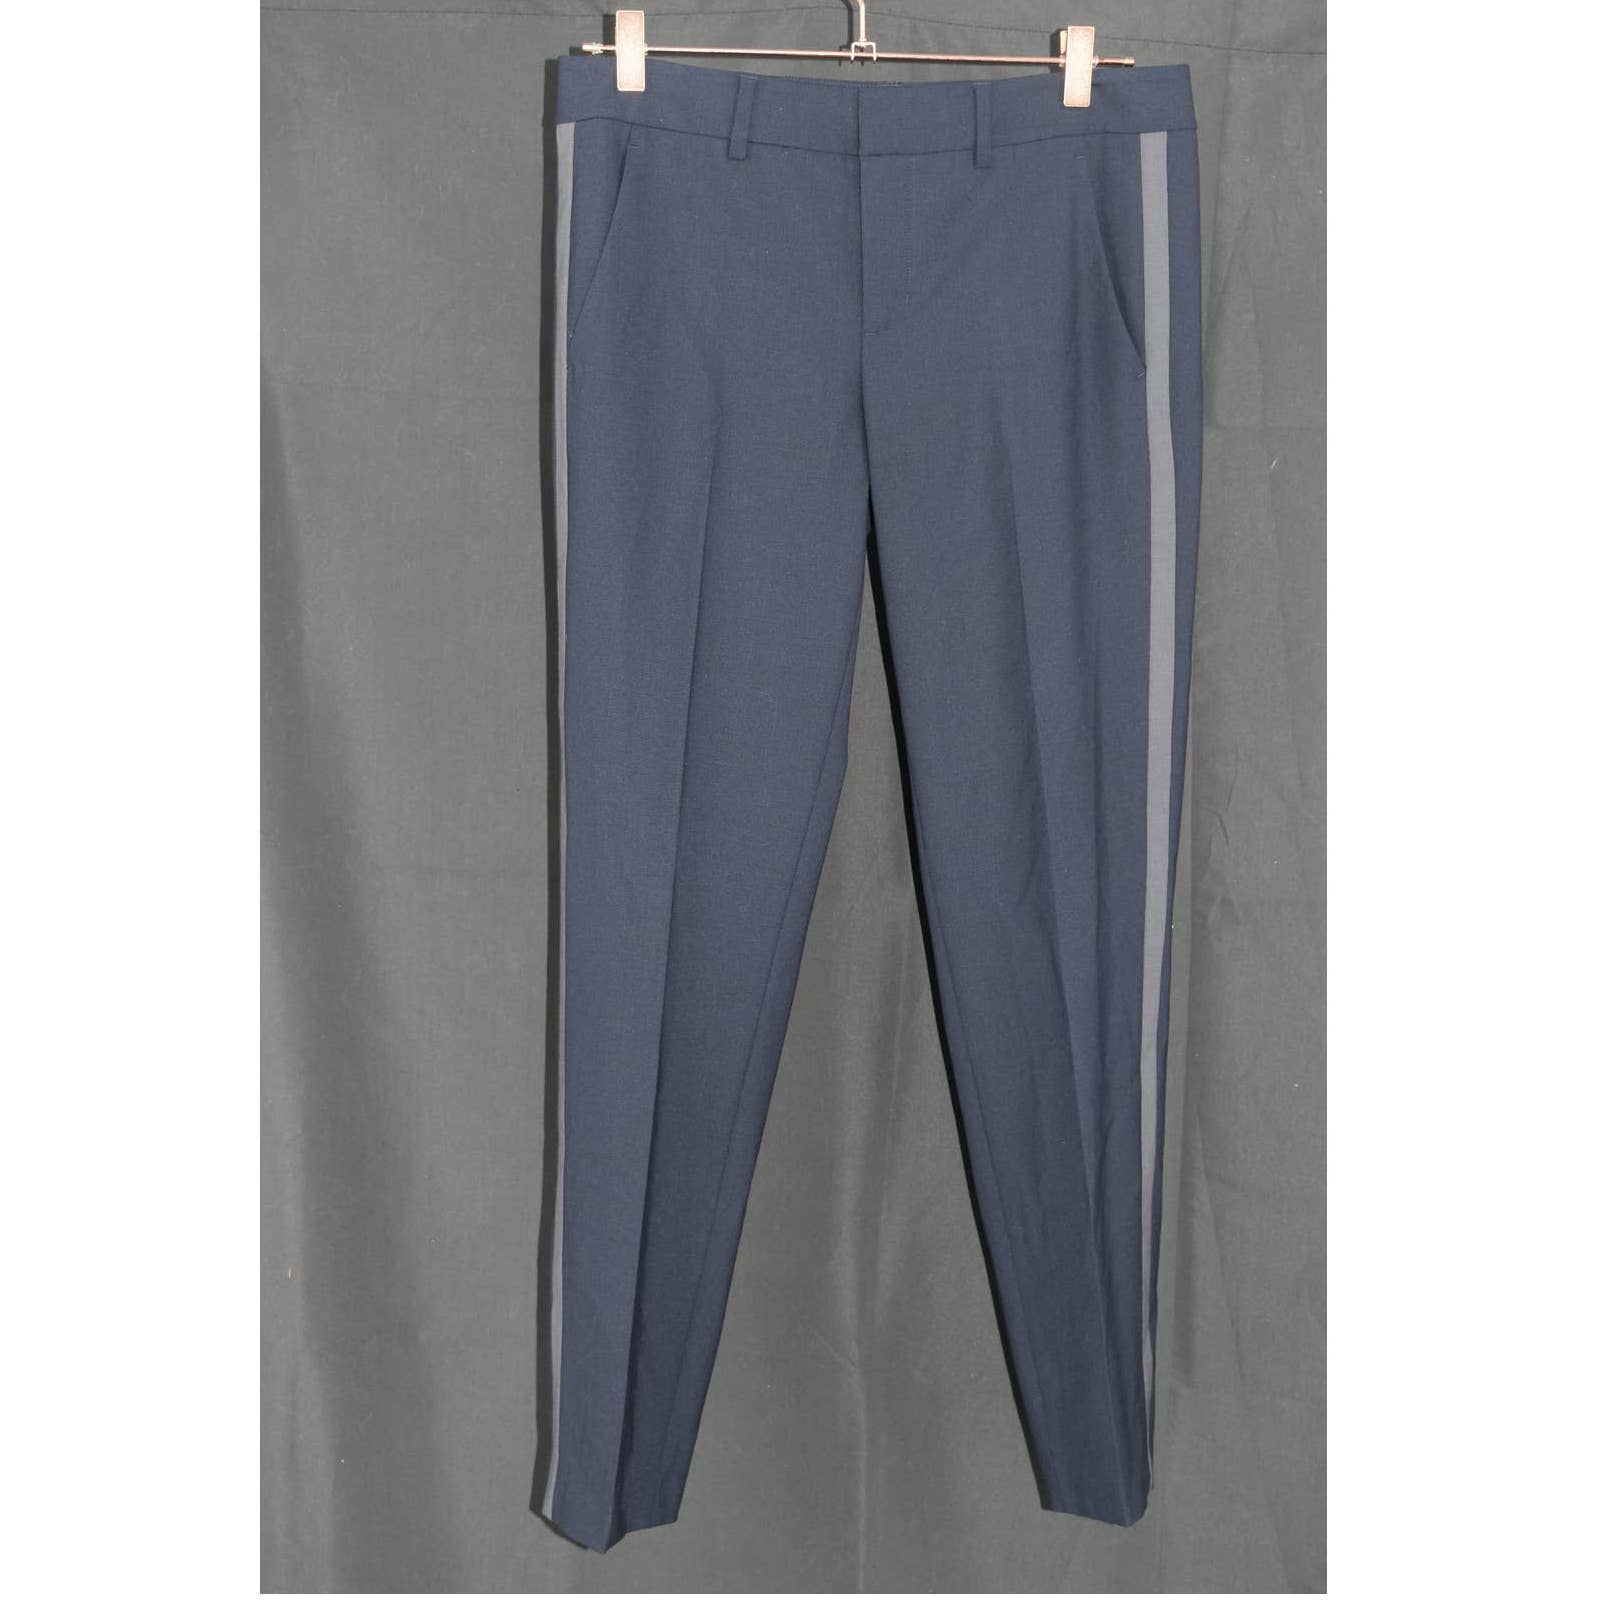 Vince Navy with Grey Strip Wool Pants - 6